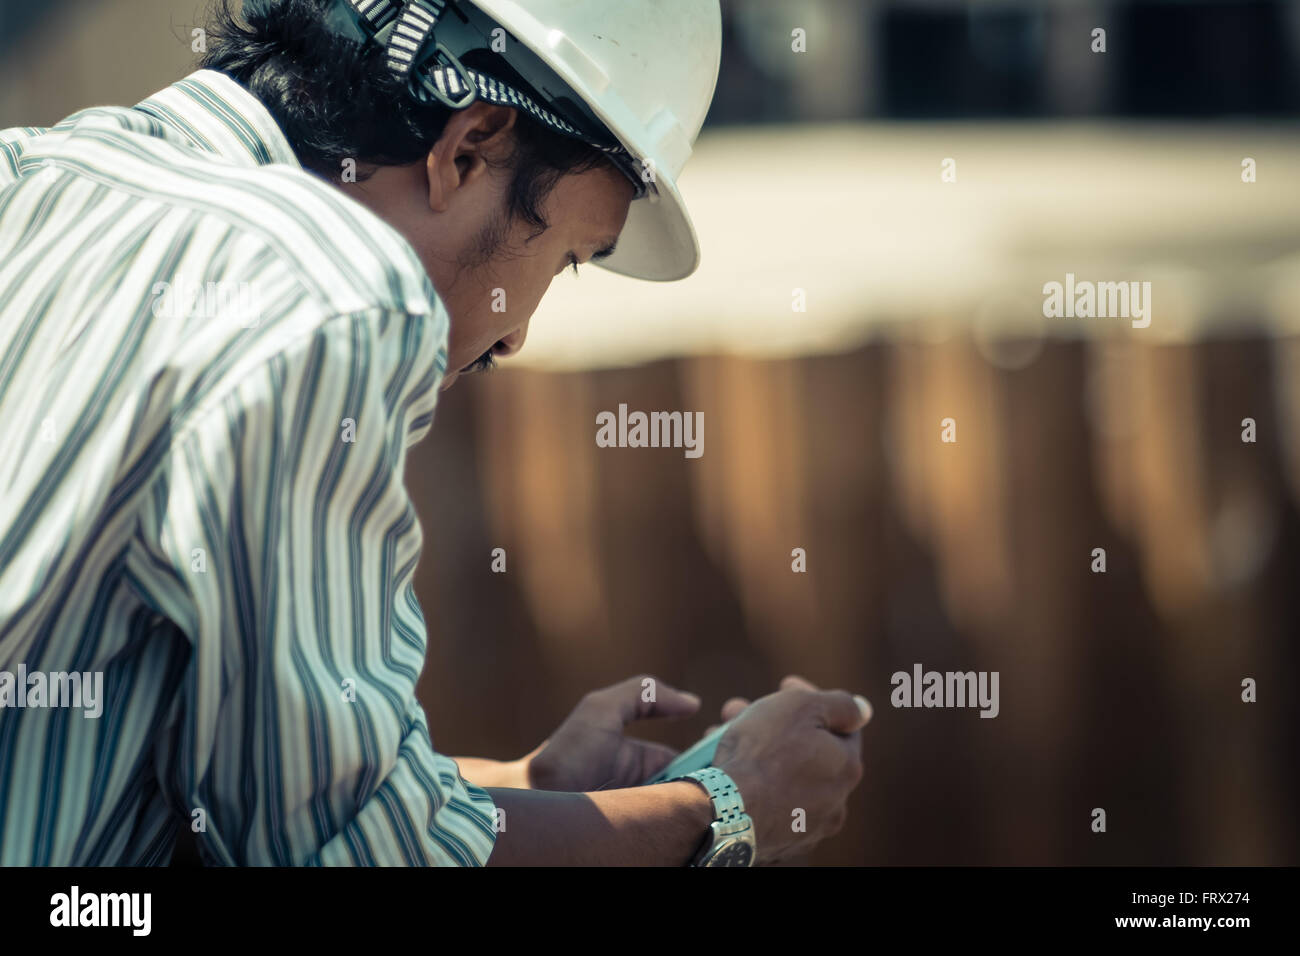 Manager of construction checking his phone. Stock Photo